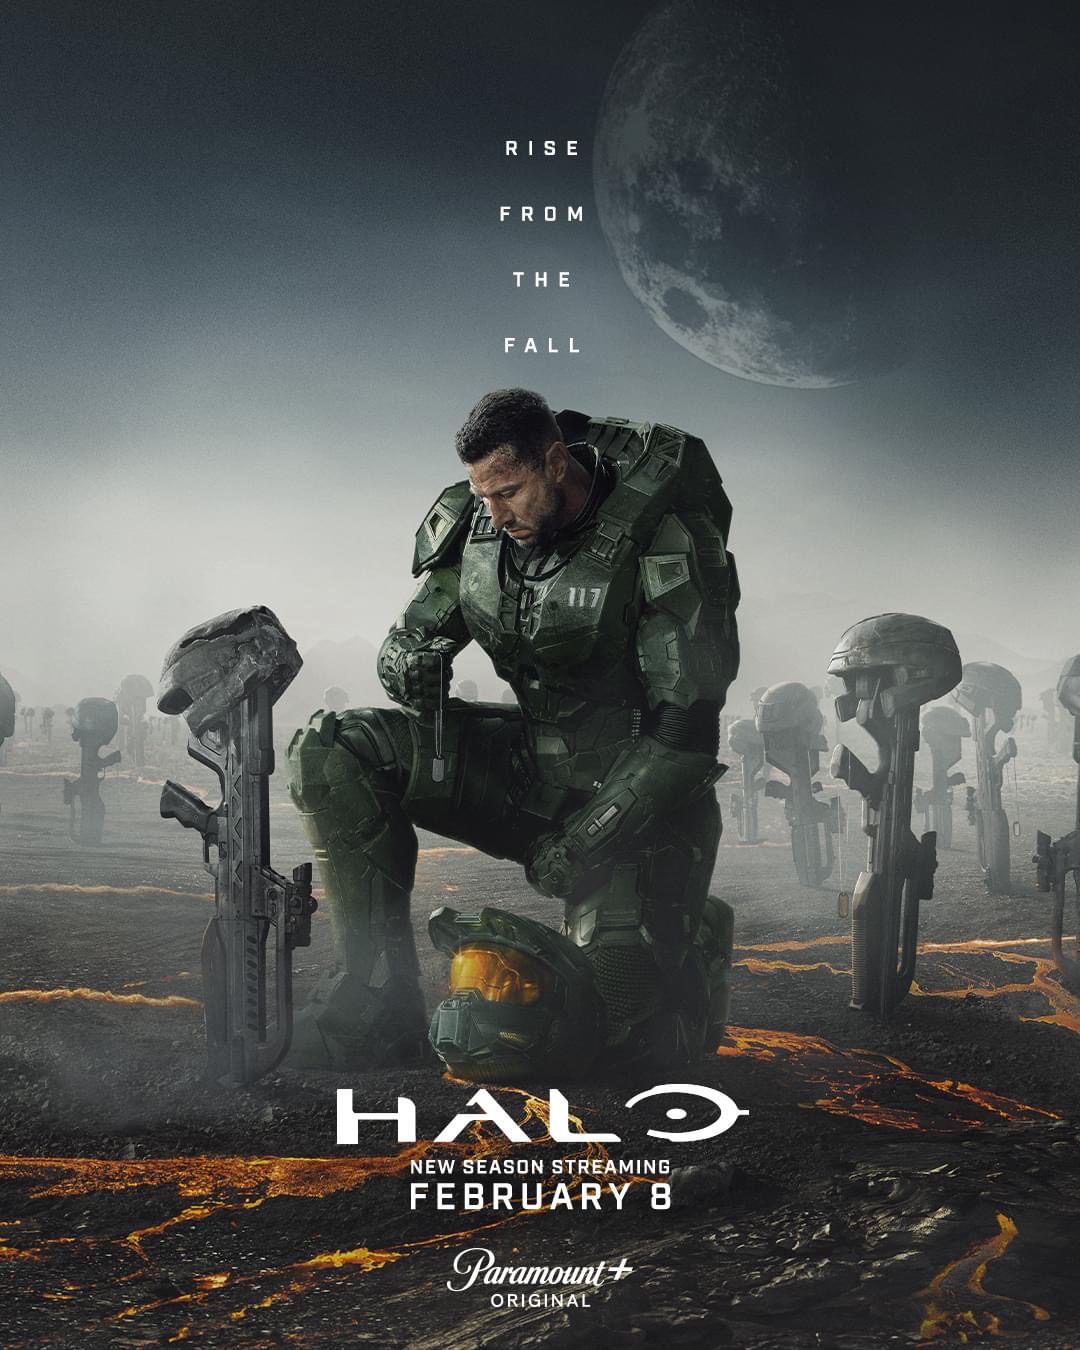 Image gallery for Halo: The Series (TV Series) - FilmAffinity